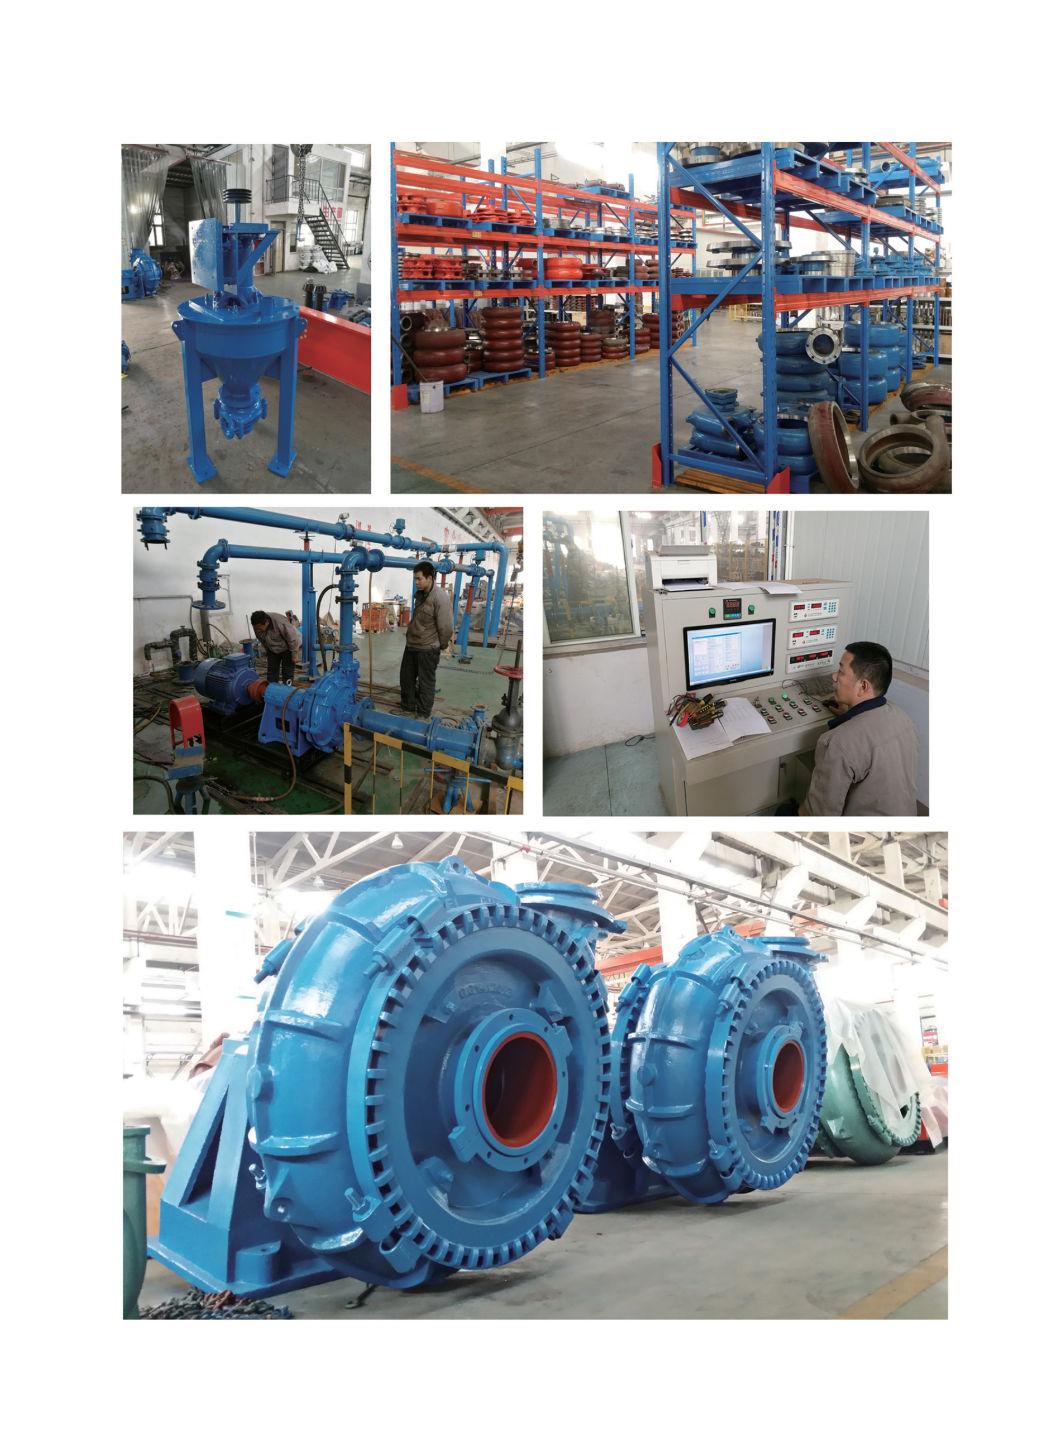 Strong Power Horizontal Large Flow Centrifugal 8/6e-Ah (R) Industrial Slurry Pump in The Metallurgical, Mining, Caol, Power, Building Material